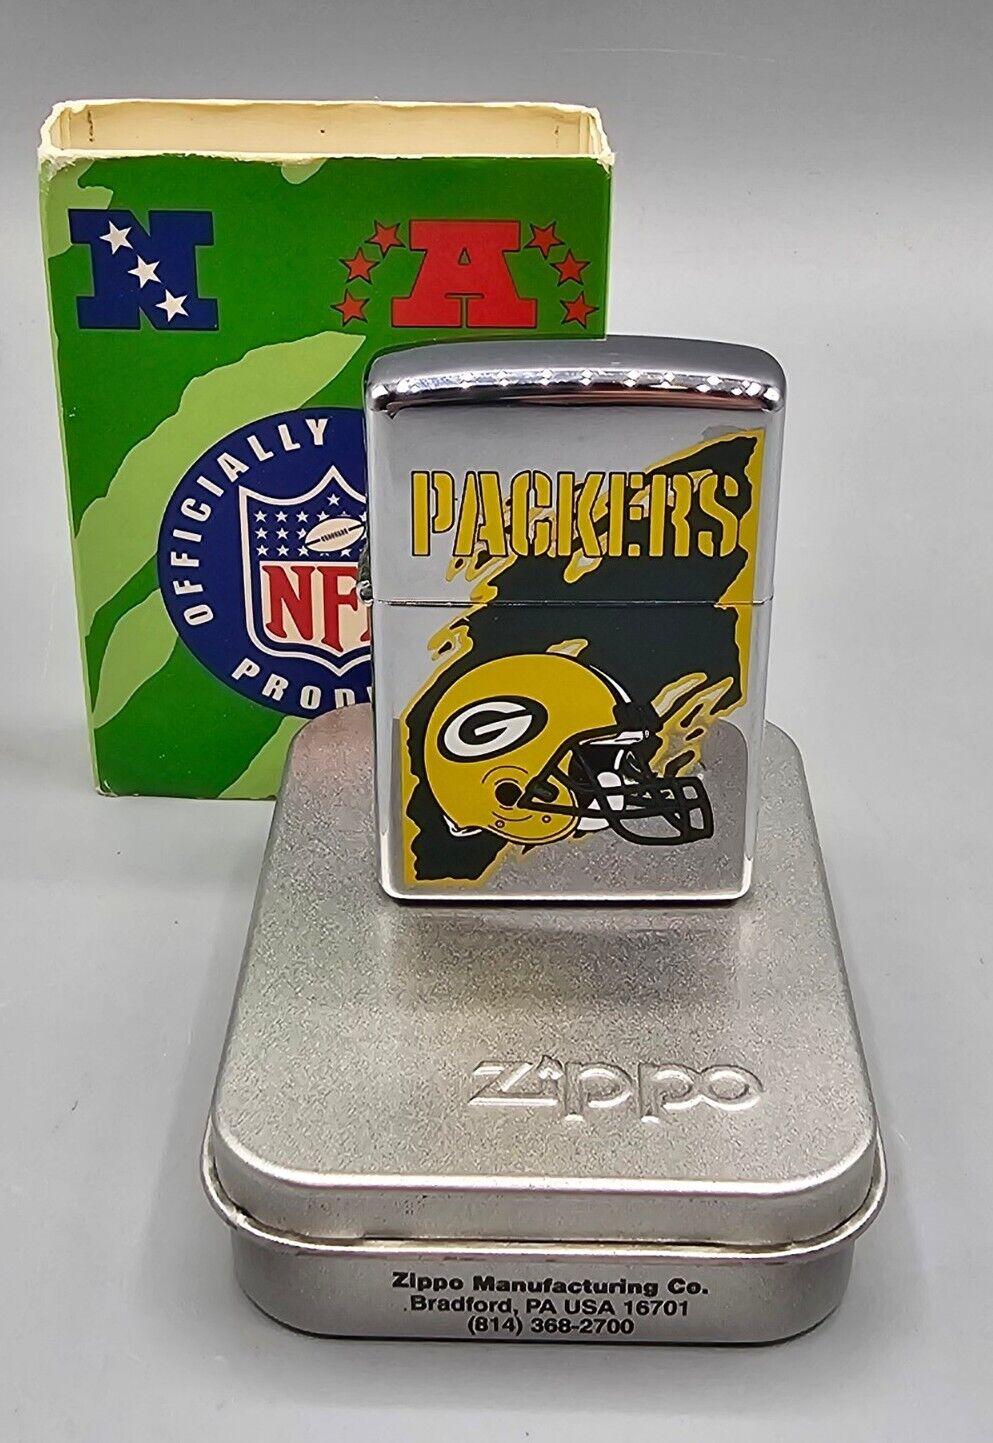 VINTAGE 1997 NFL Green Bay PACKERS Chrome Zippo Lighter #443 - NEW in PACKAGE 